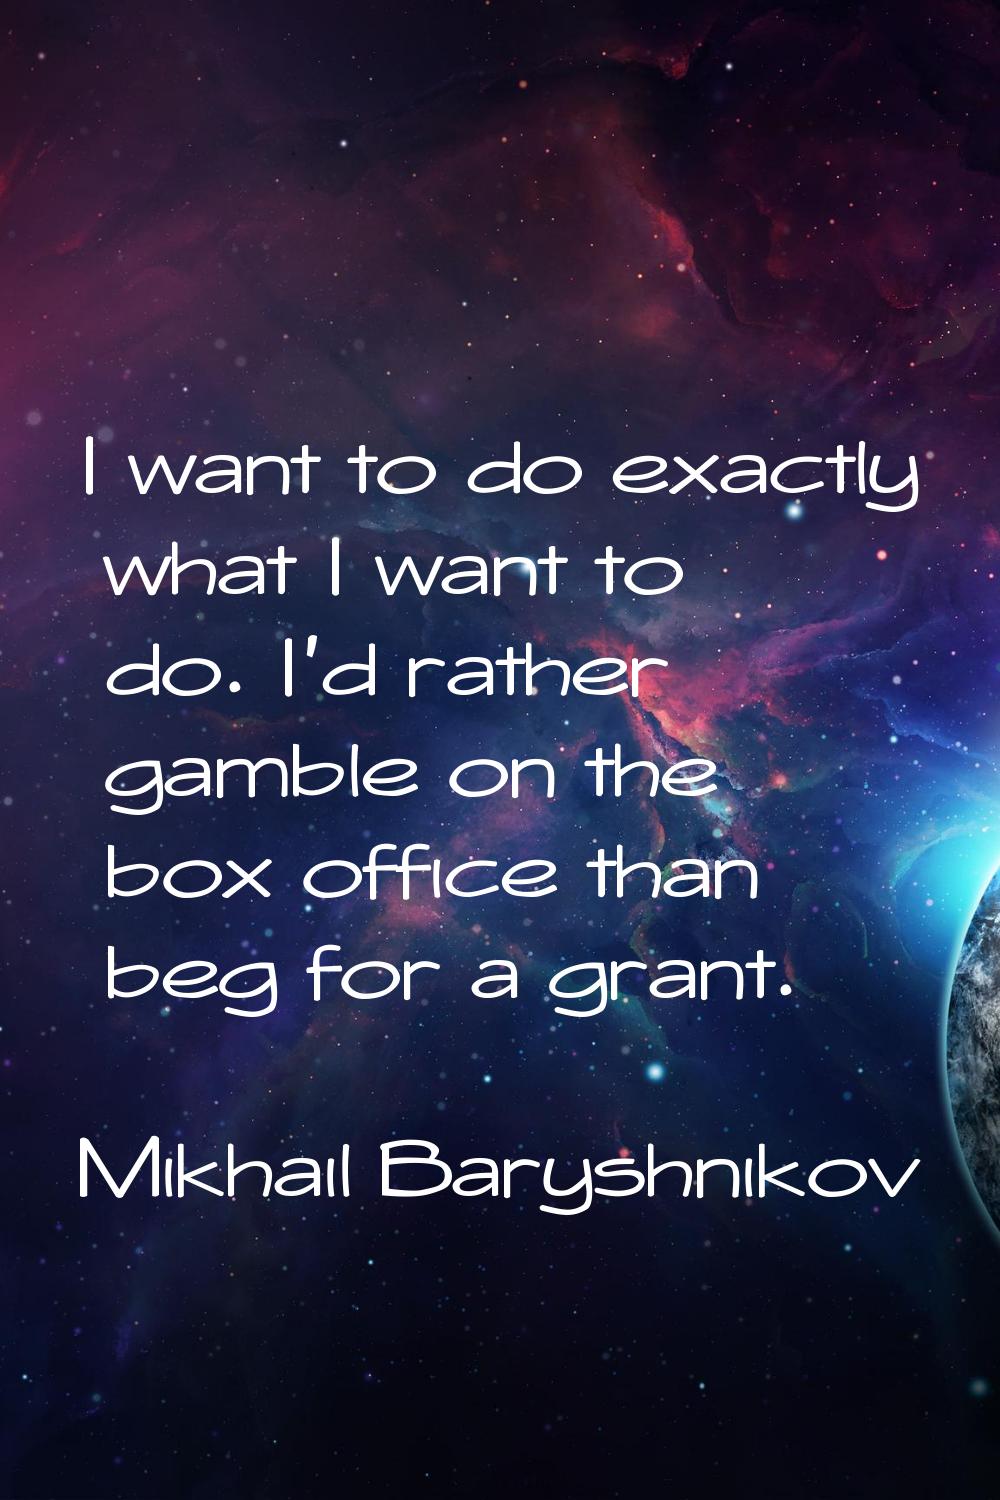 I want to do exactly what I want to do. I'd rather gamble on the box office than beg for a grant.